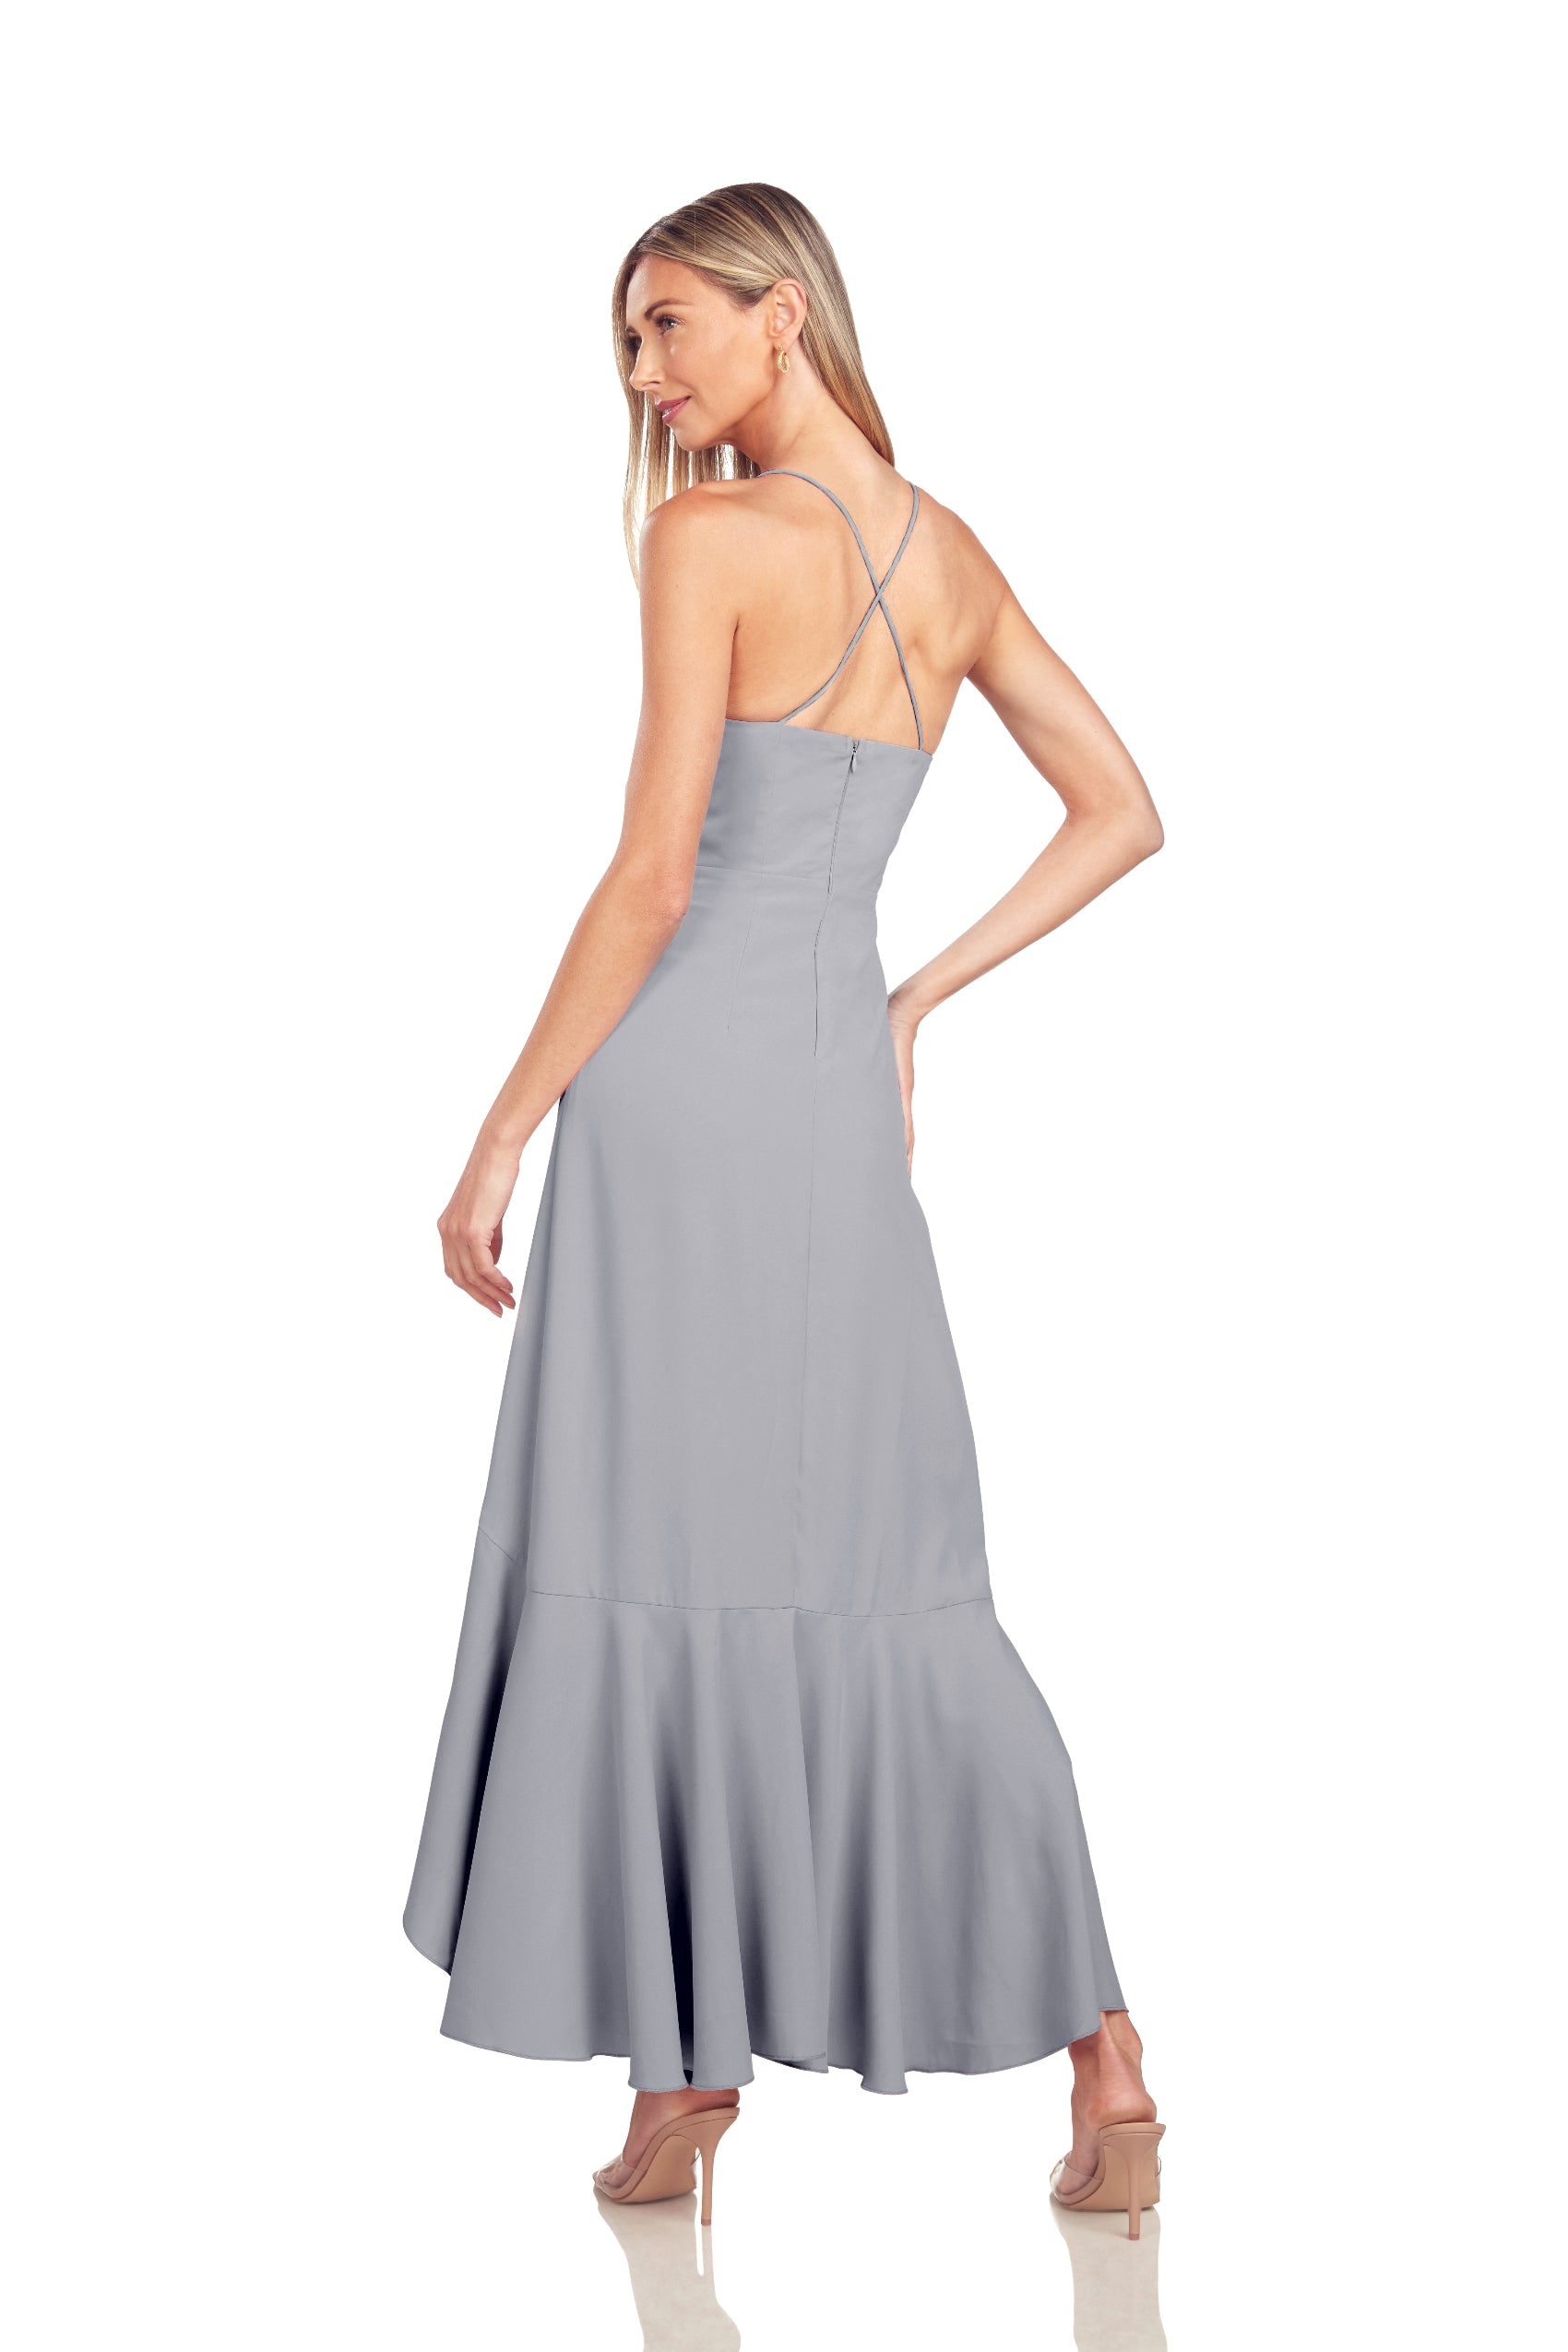 PAIGE GOWN SILVER BLUE